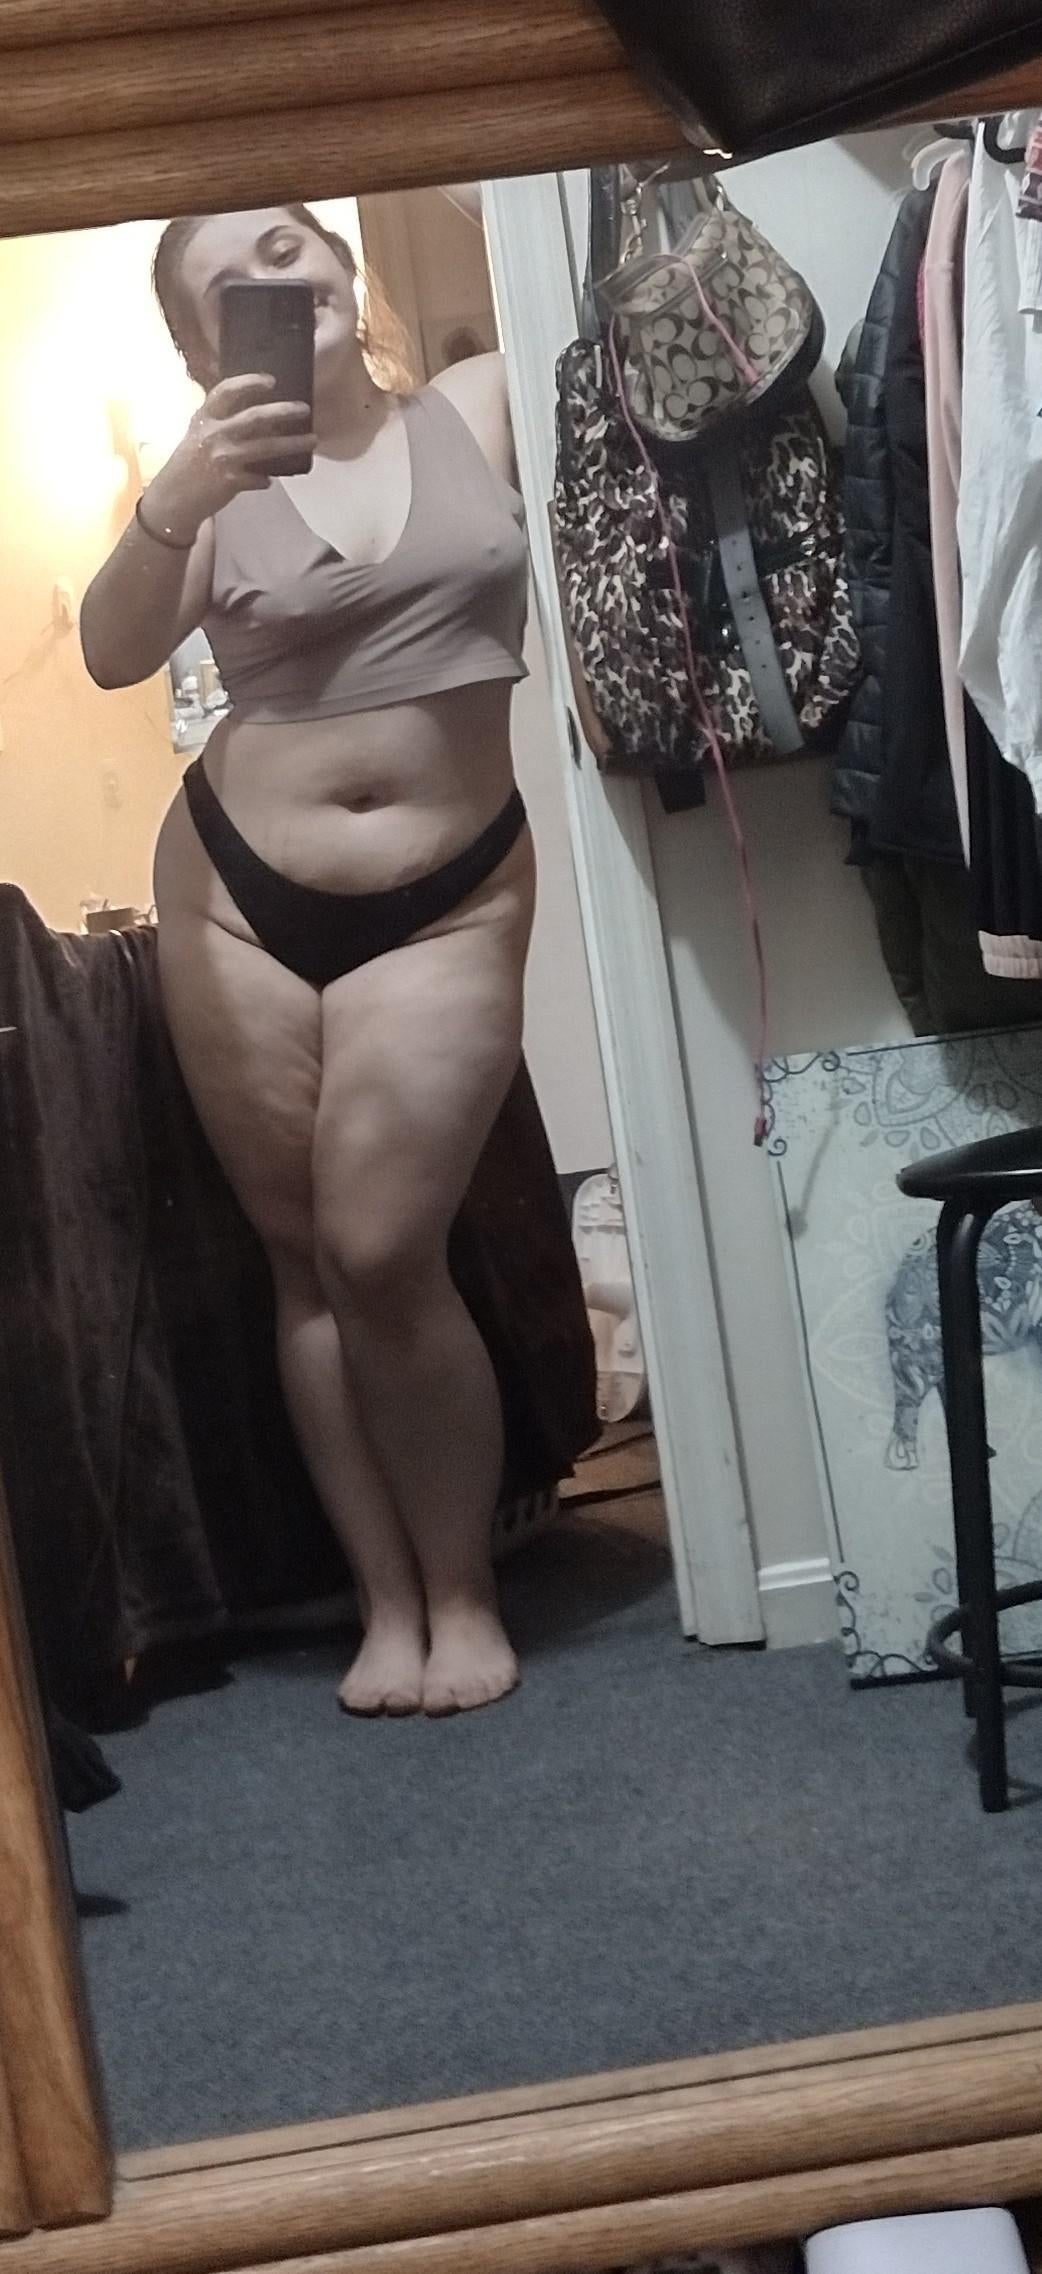 How would you rate my body